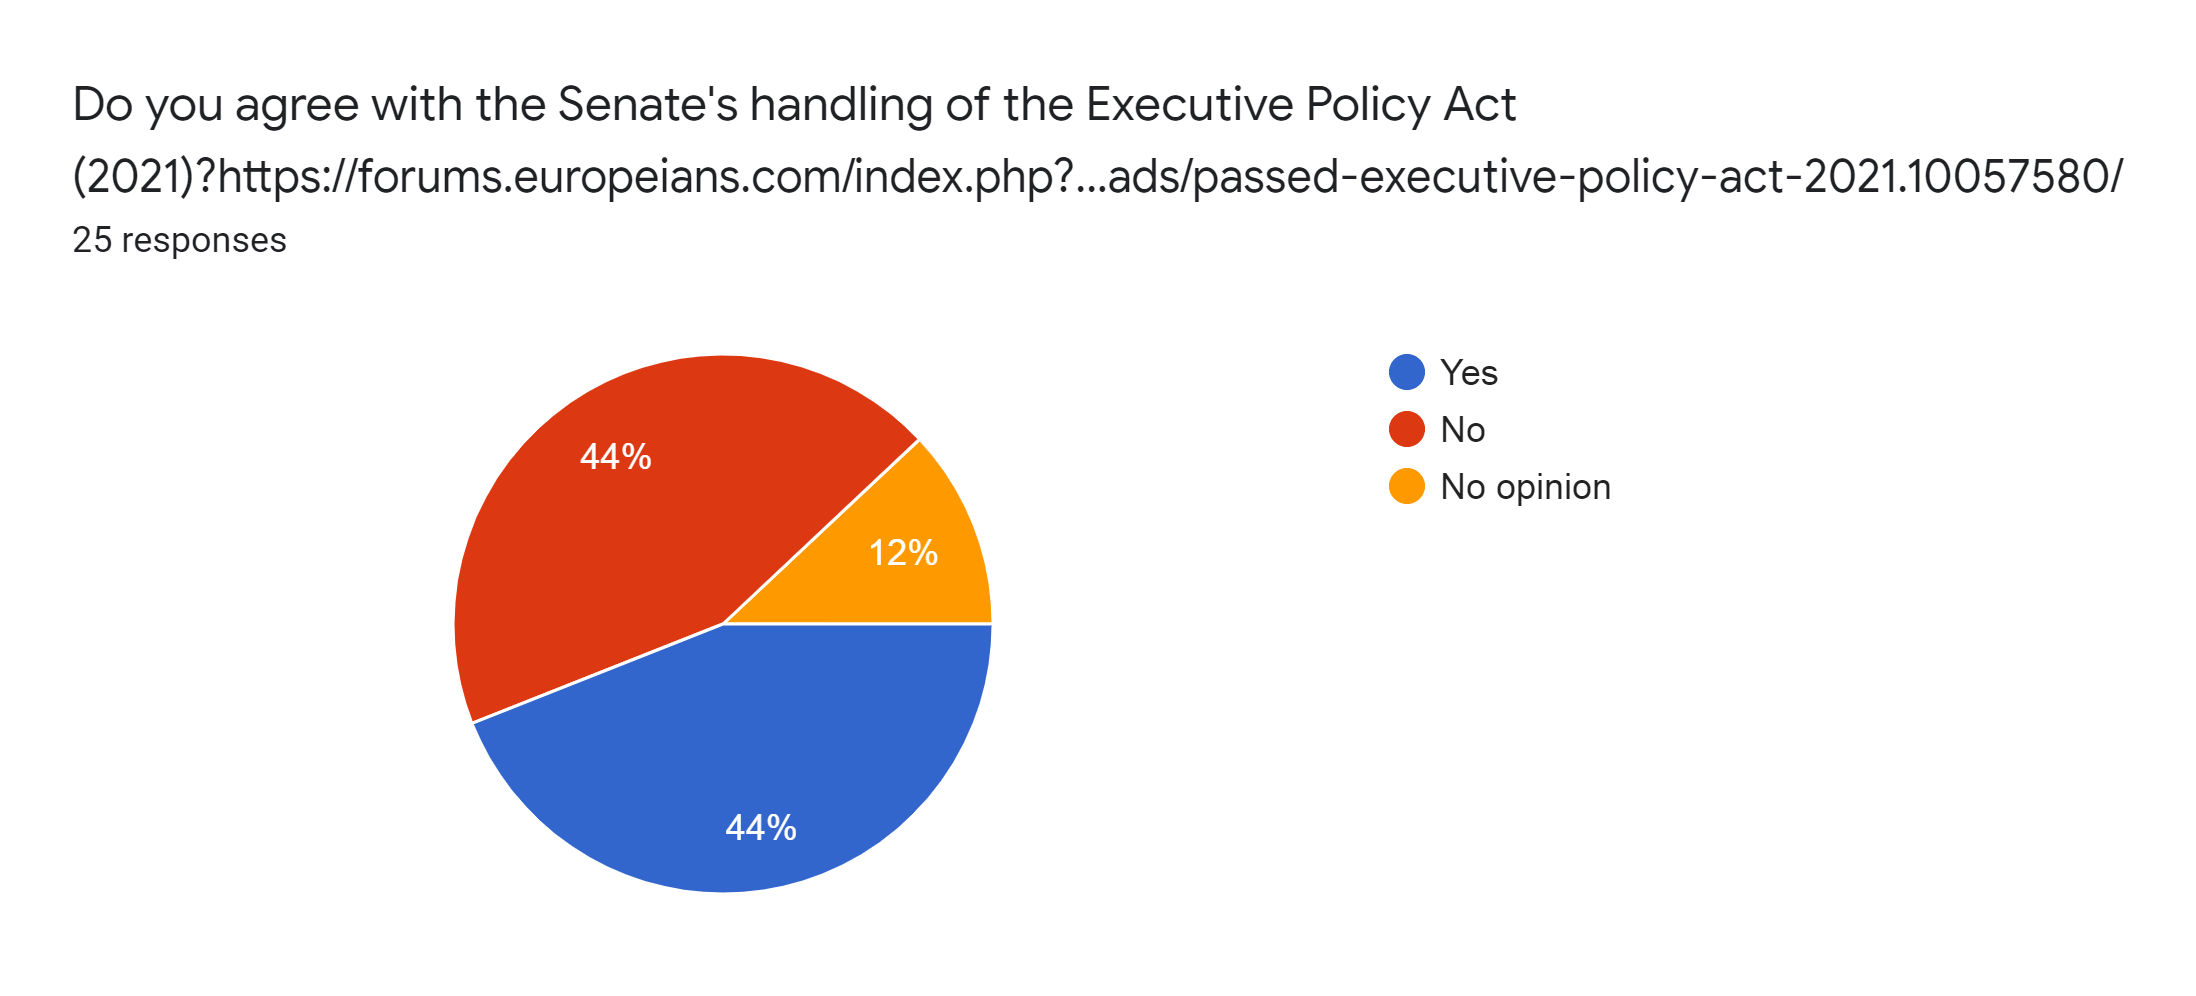 Forms response chart. Question title: Do you agree with the Senate's handling of the Executive Policy Act (2021)?https://forums.europeians.com/index.php?threads/passed-executive-policy-act-2021.10057580/. Number of responses: 25 responses.